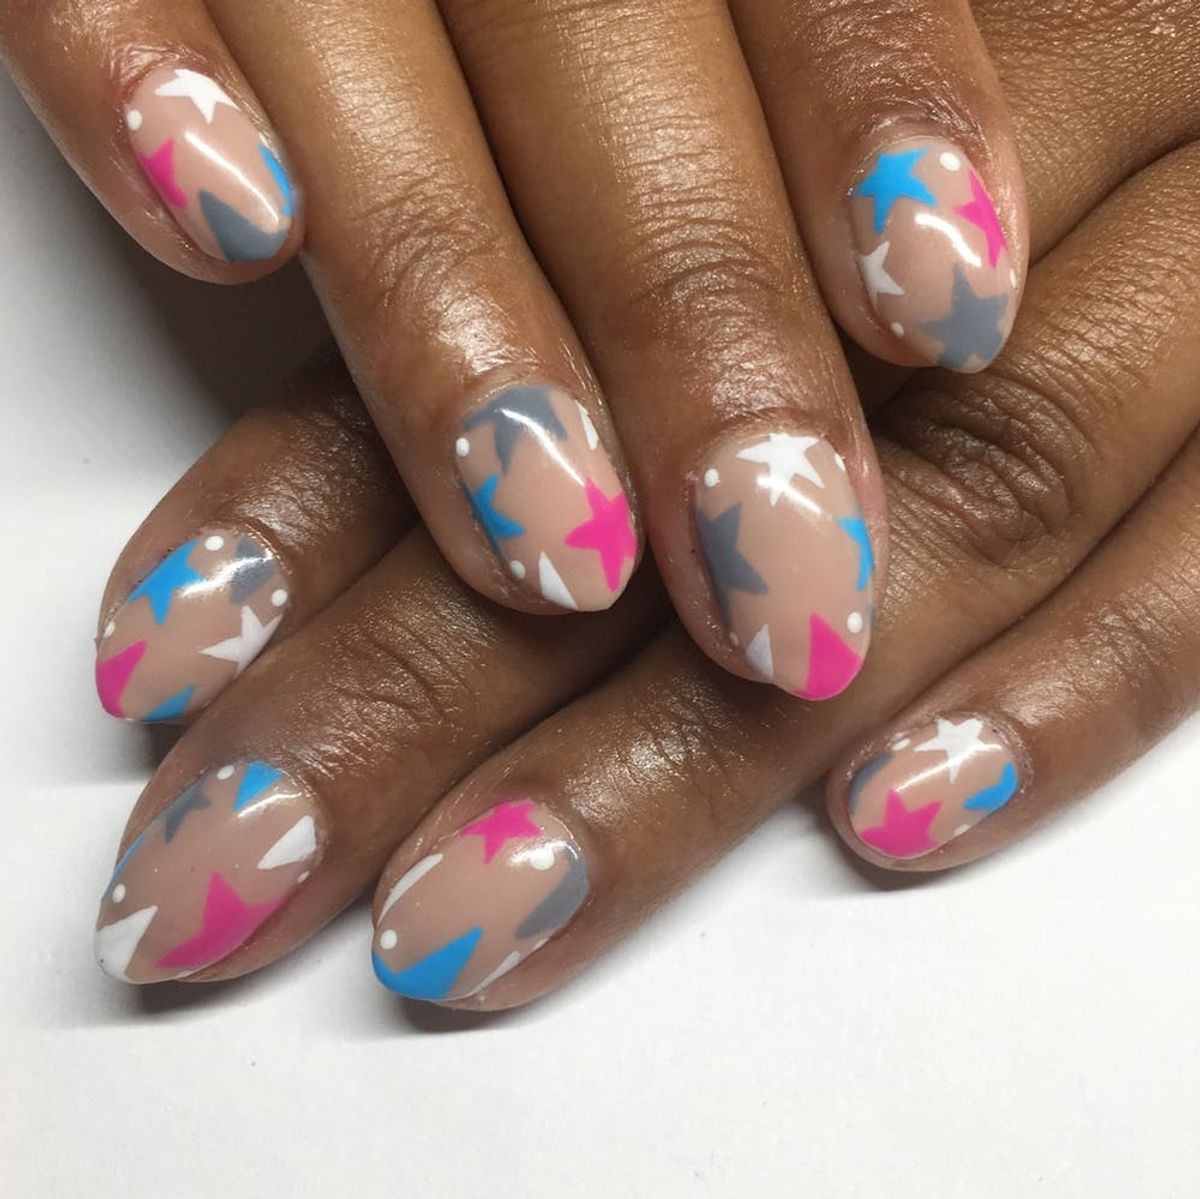 The 16 Best Negative Space Manicures We’ve Seen This Summer